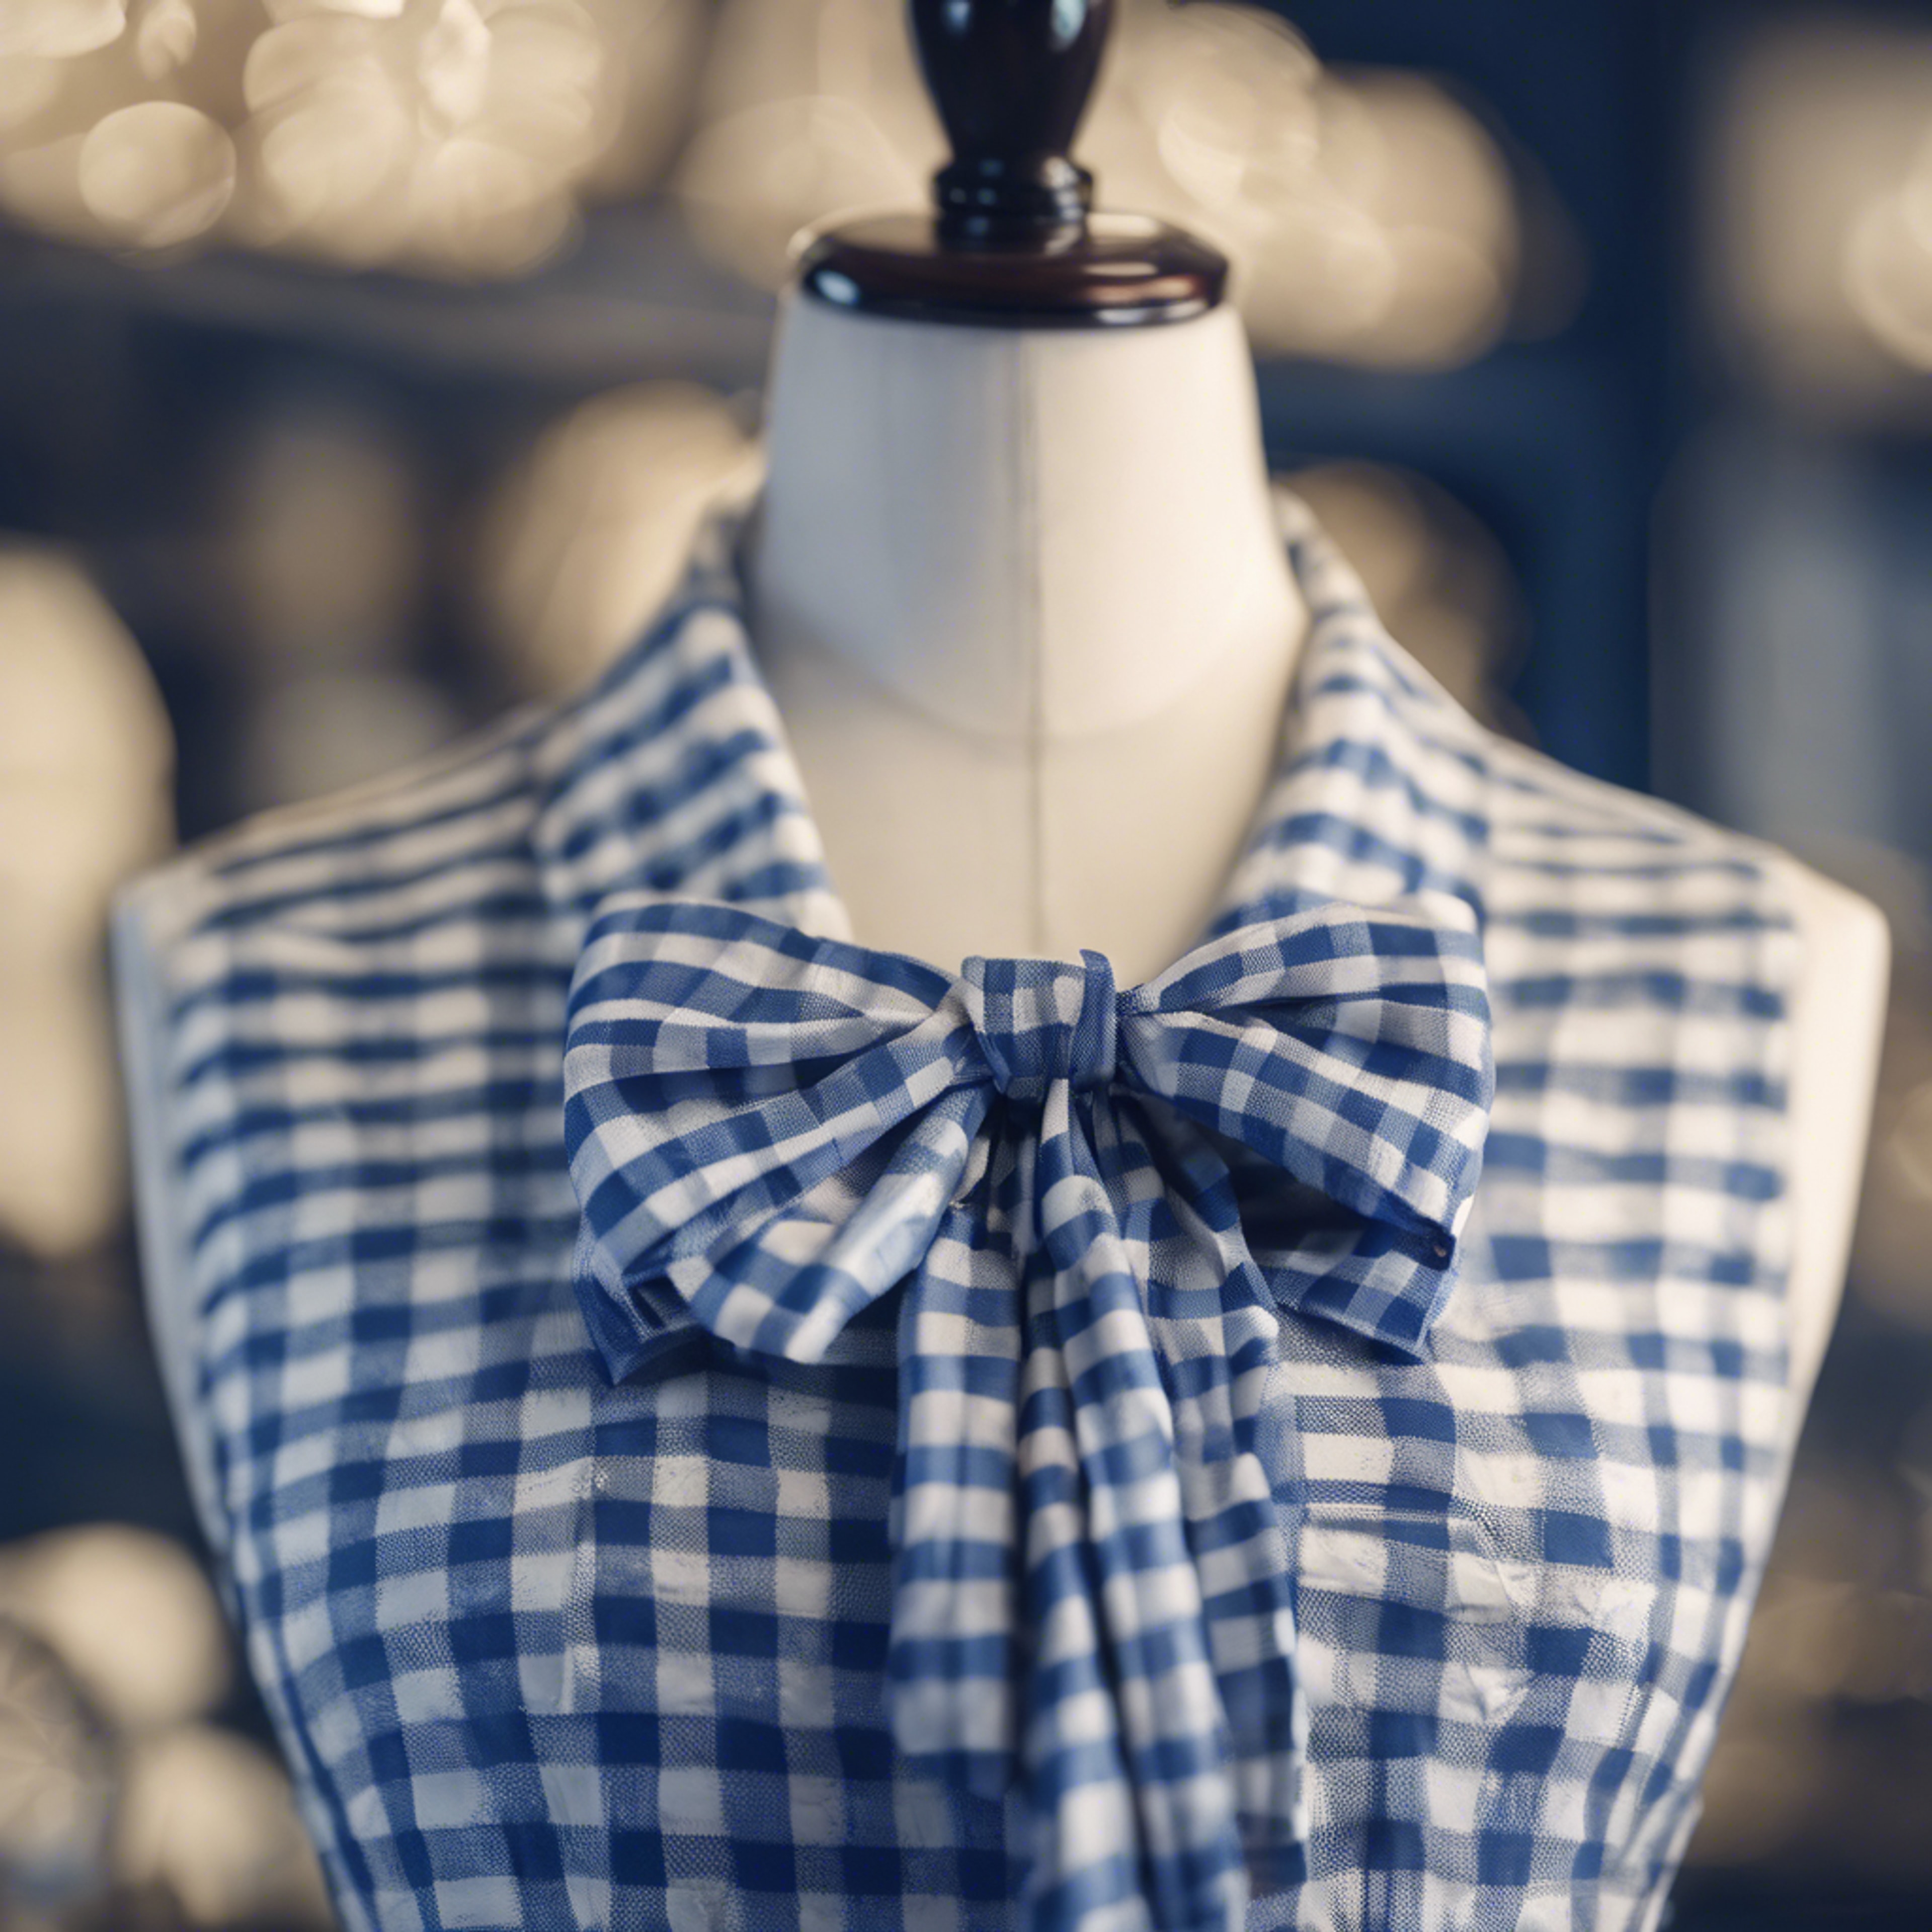 A preppy style blue and white chequered dress with a neatly tied bow on a mannequin.” Tapeet[2cff79e4d79d40c780d3]